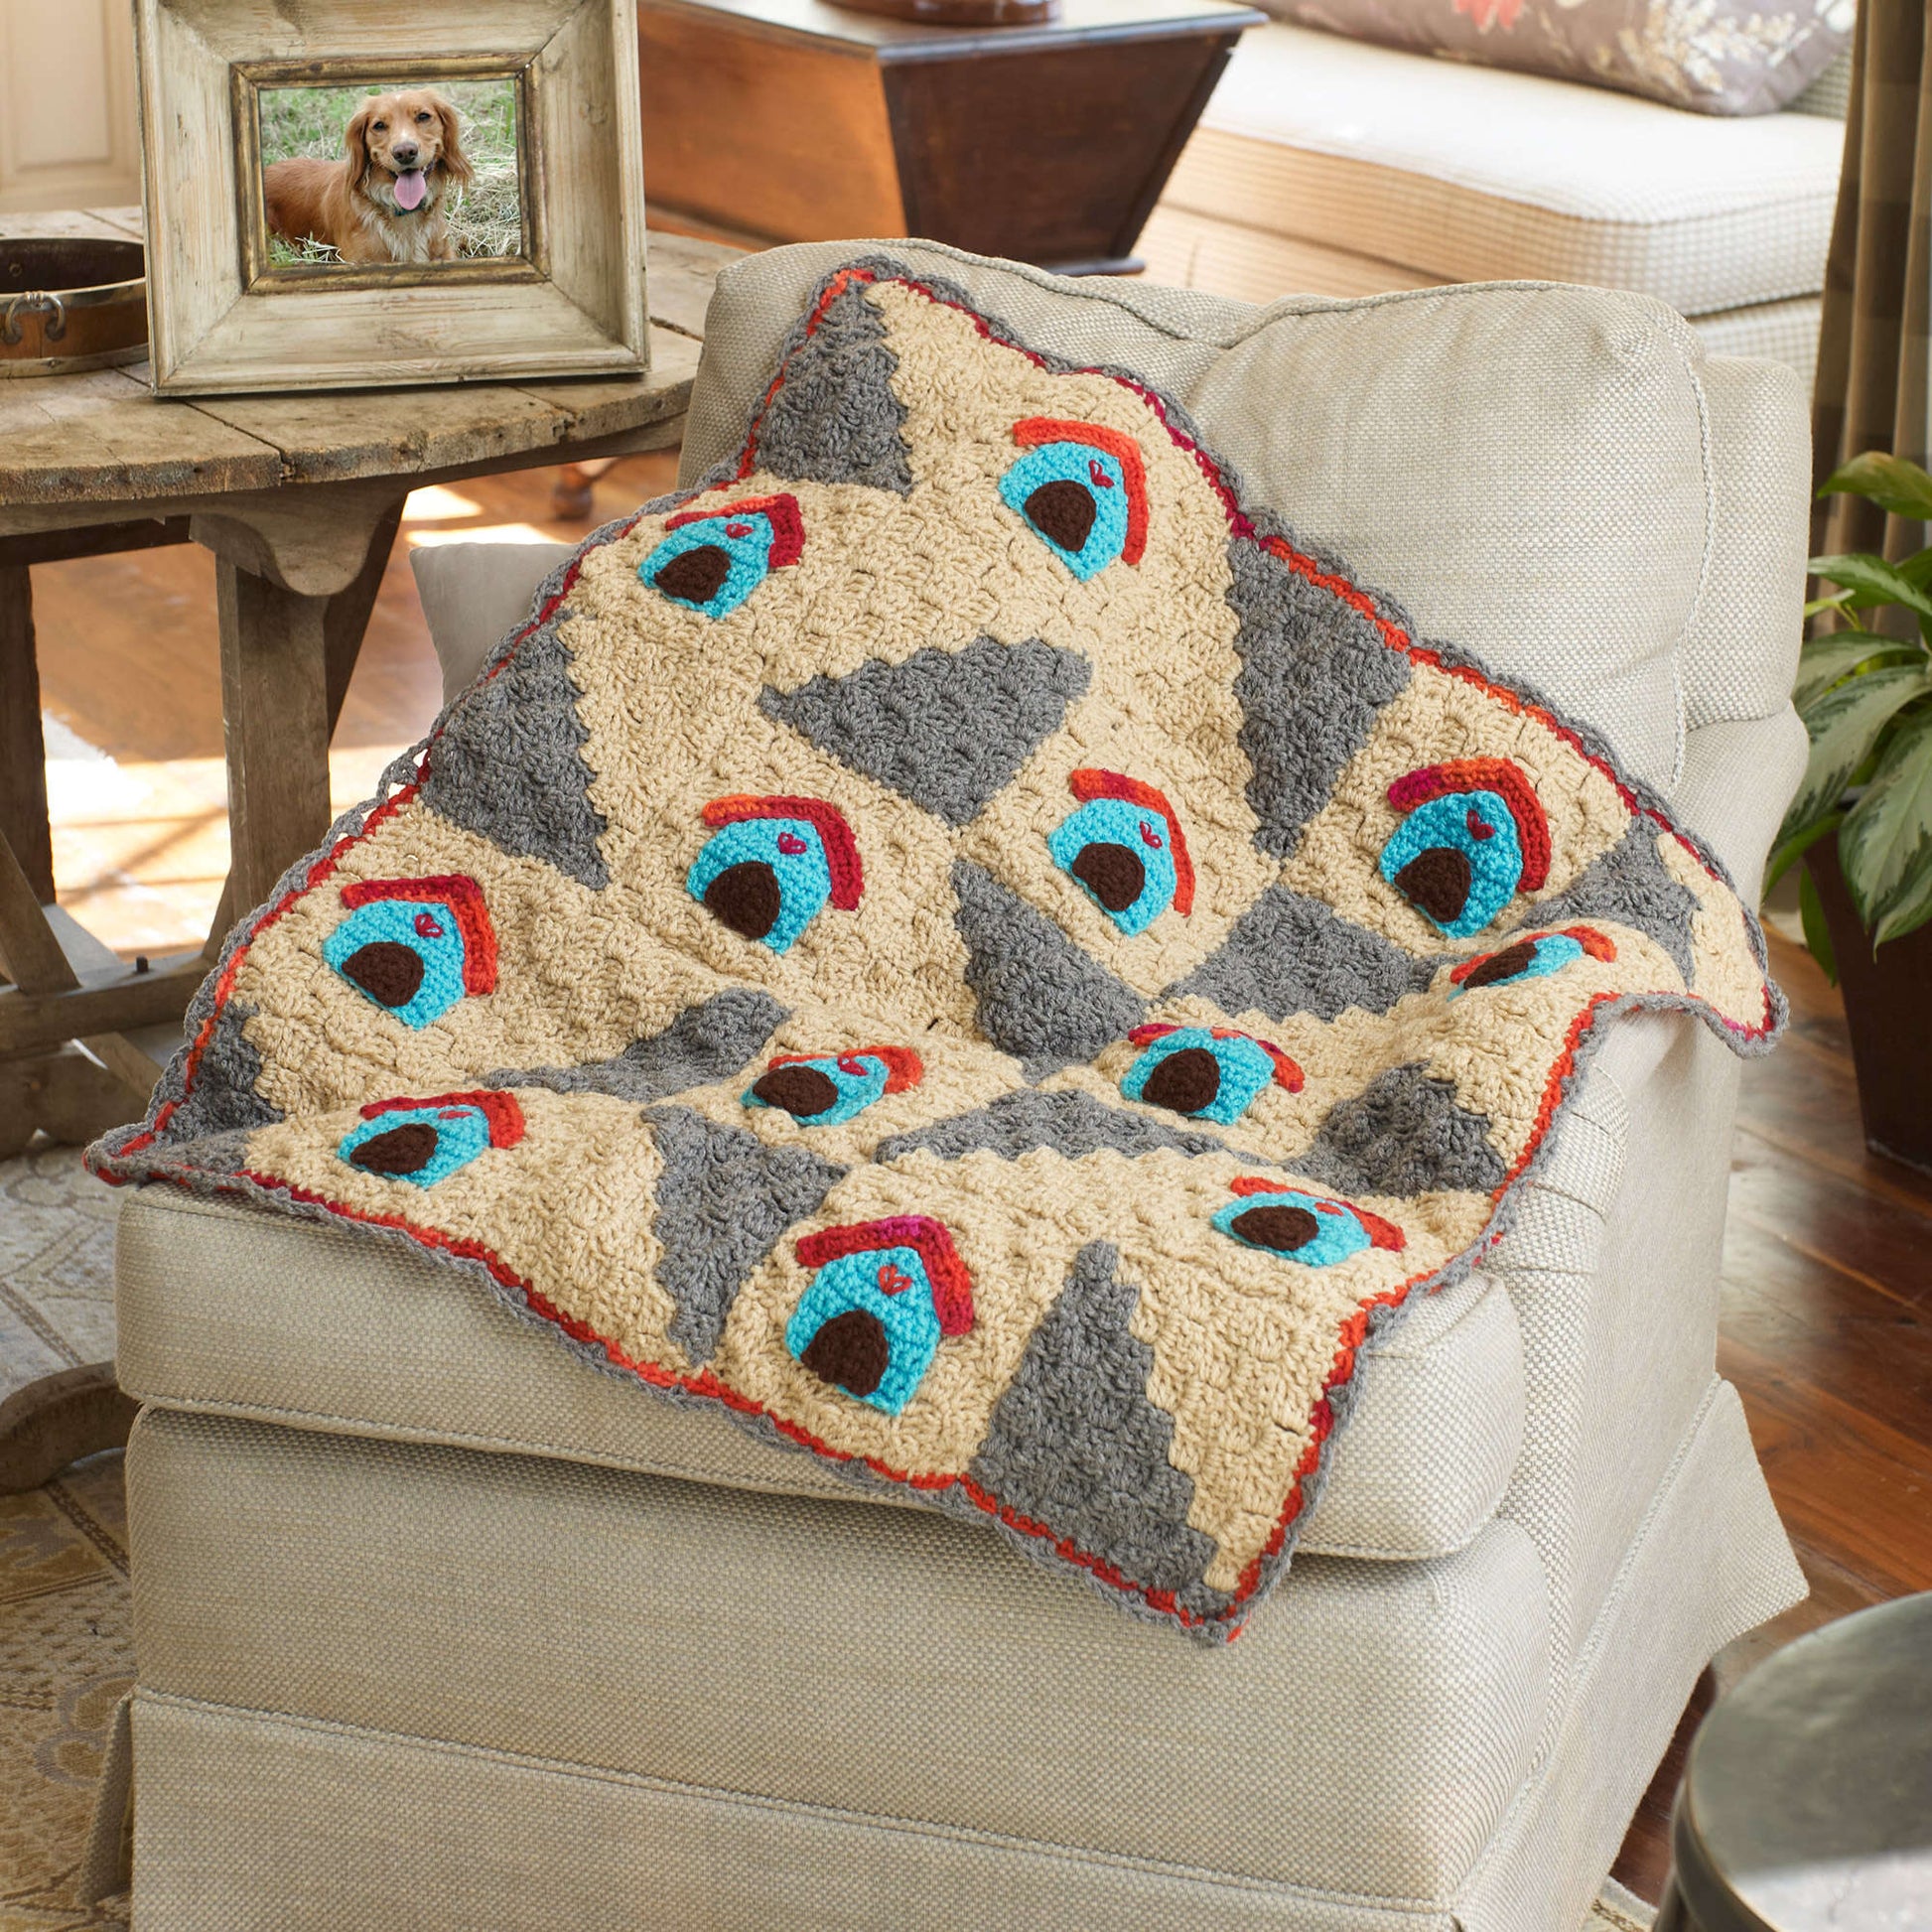 Free Red Heart A Dog's Home Throw Crochet Pattern